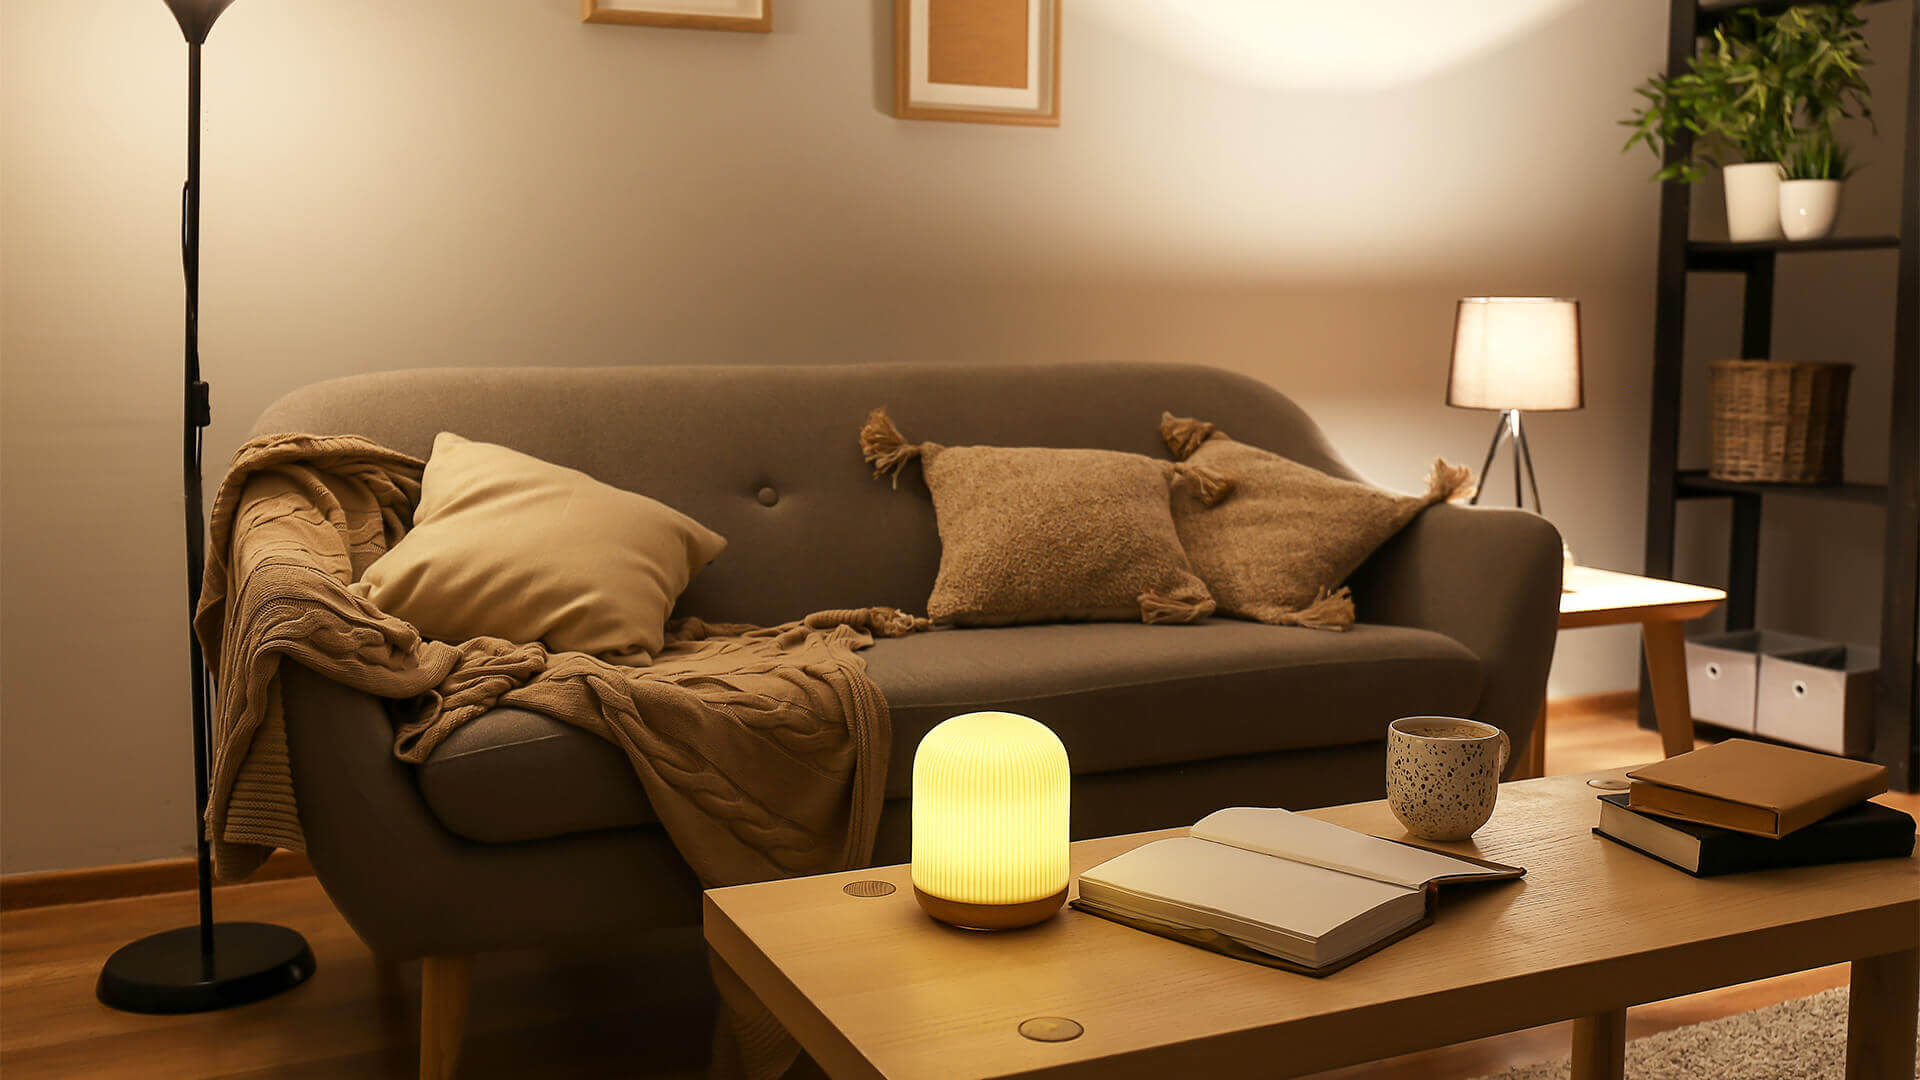 7 Tips for Making Your Home a Cozier Place to Live